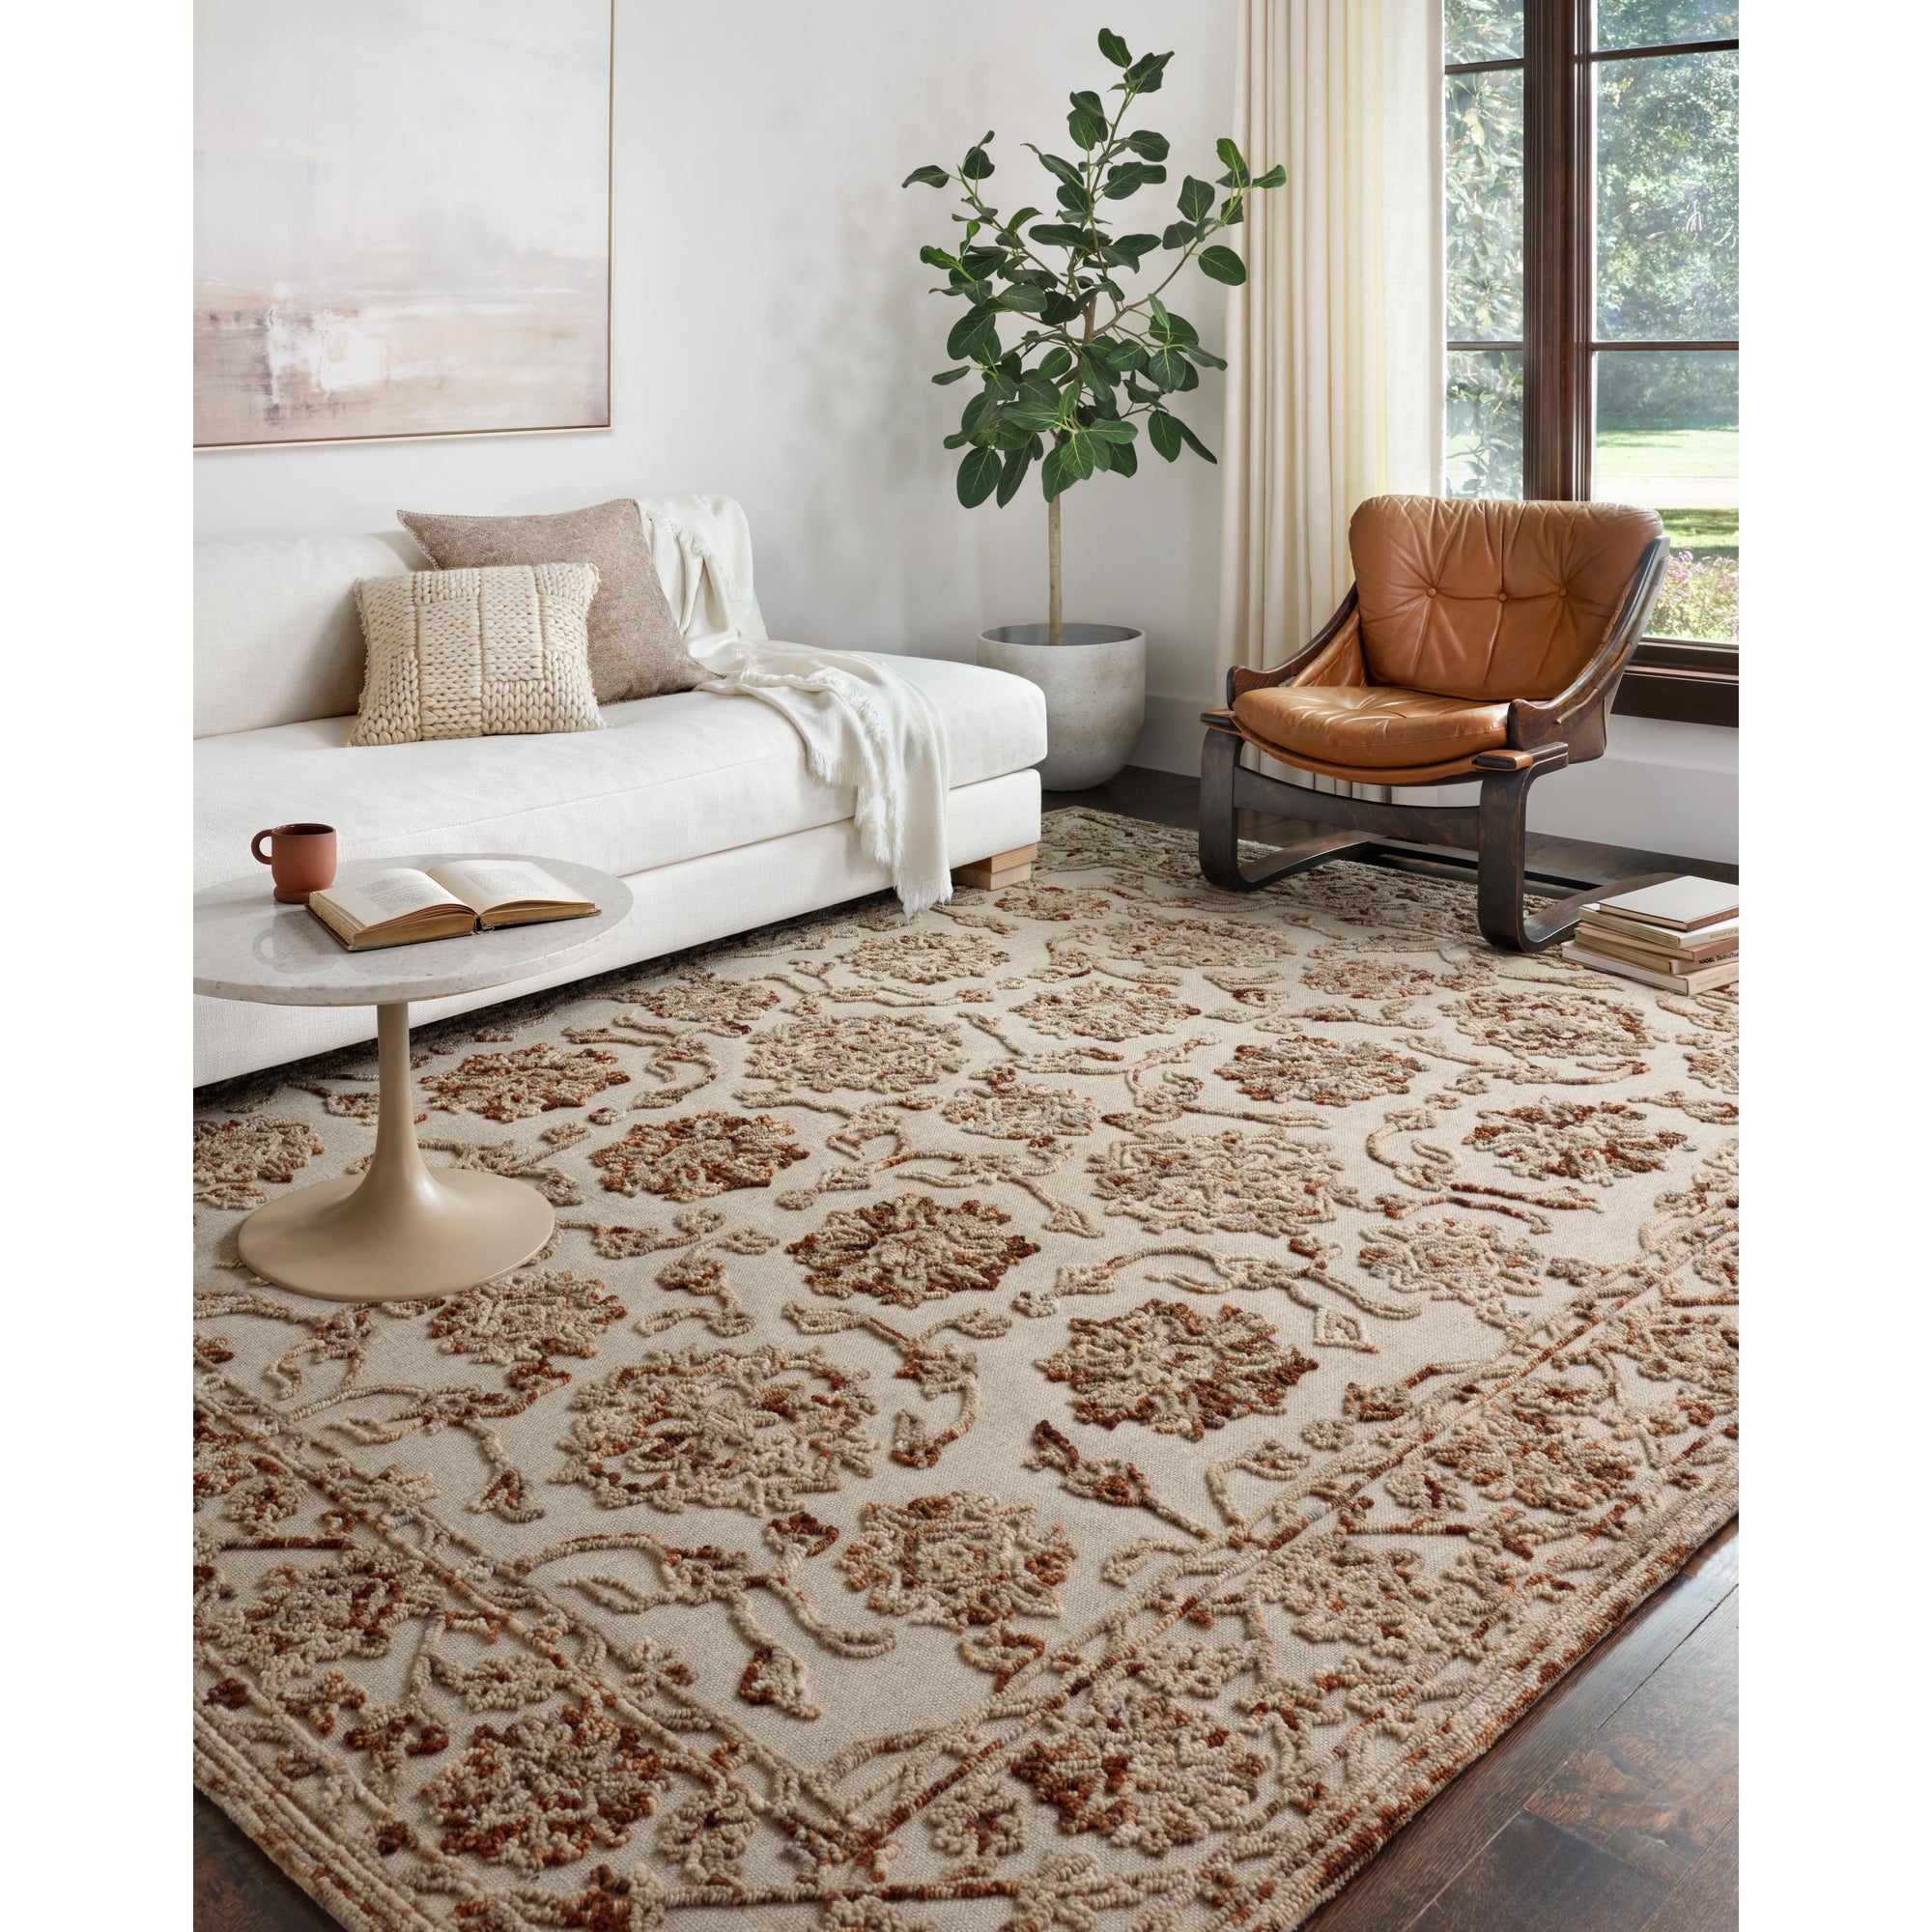 Rugs by Roo Loloi Halle Taupe Rust Area Rug in size 18" x 18" Sample